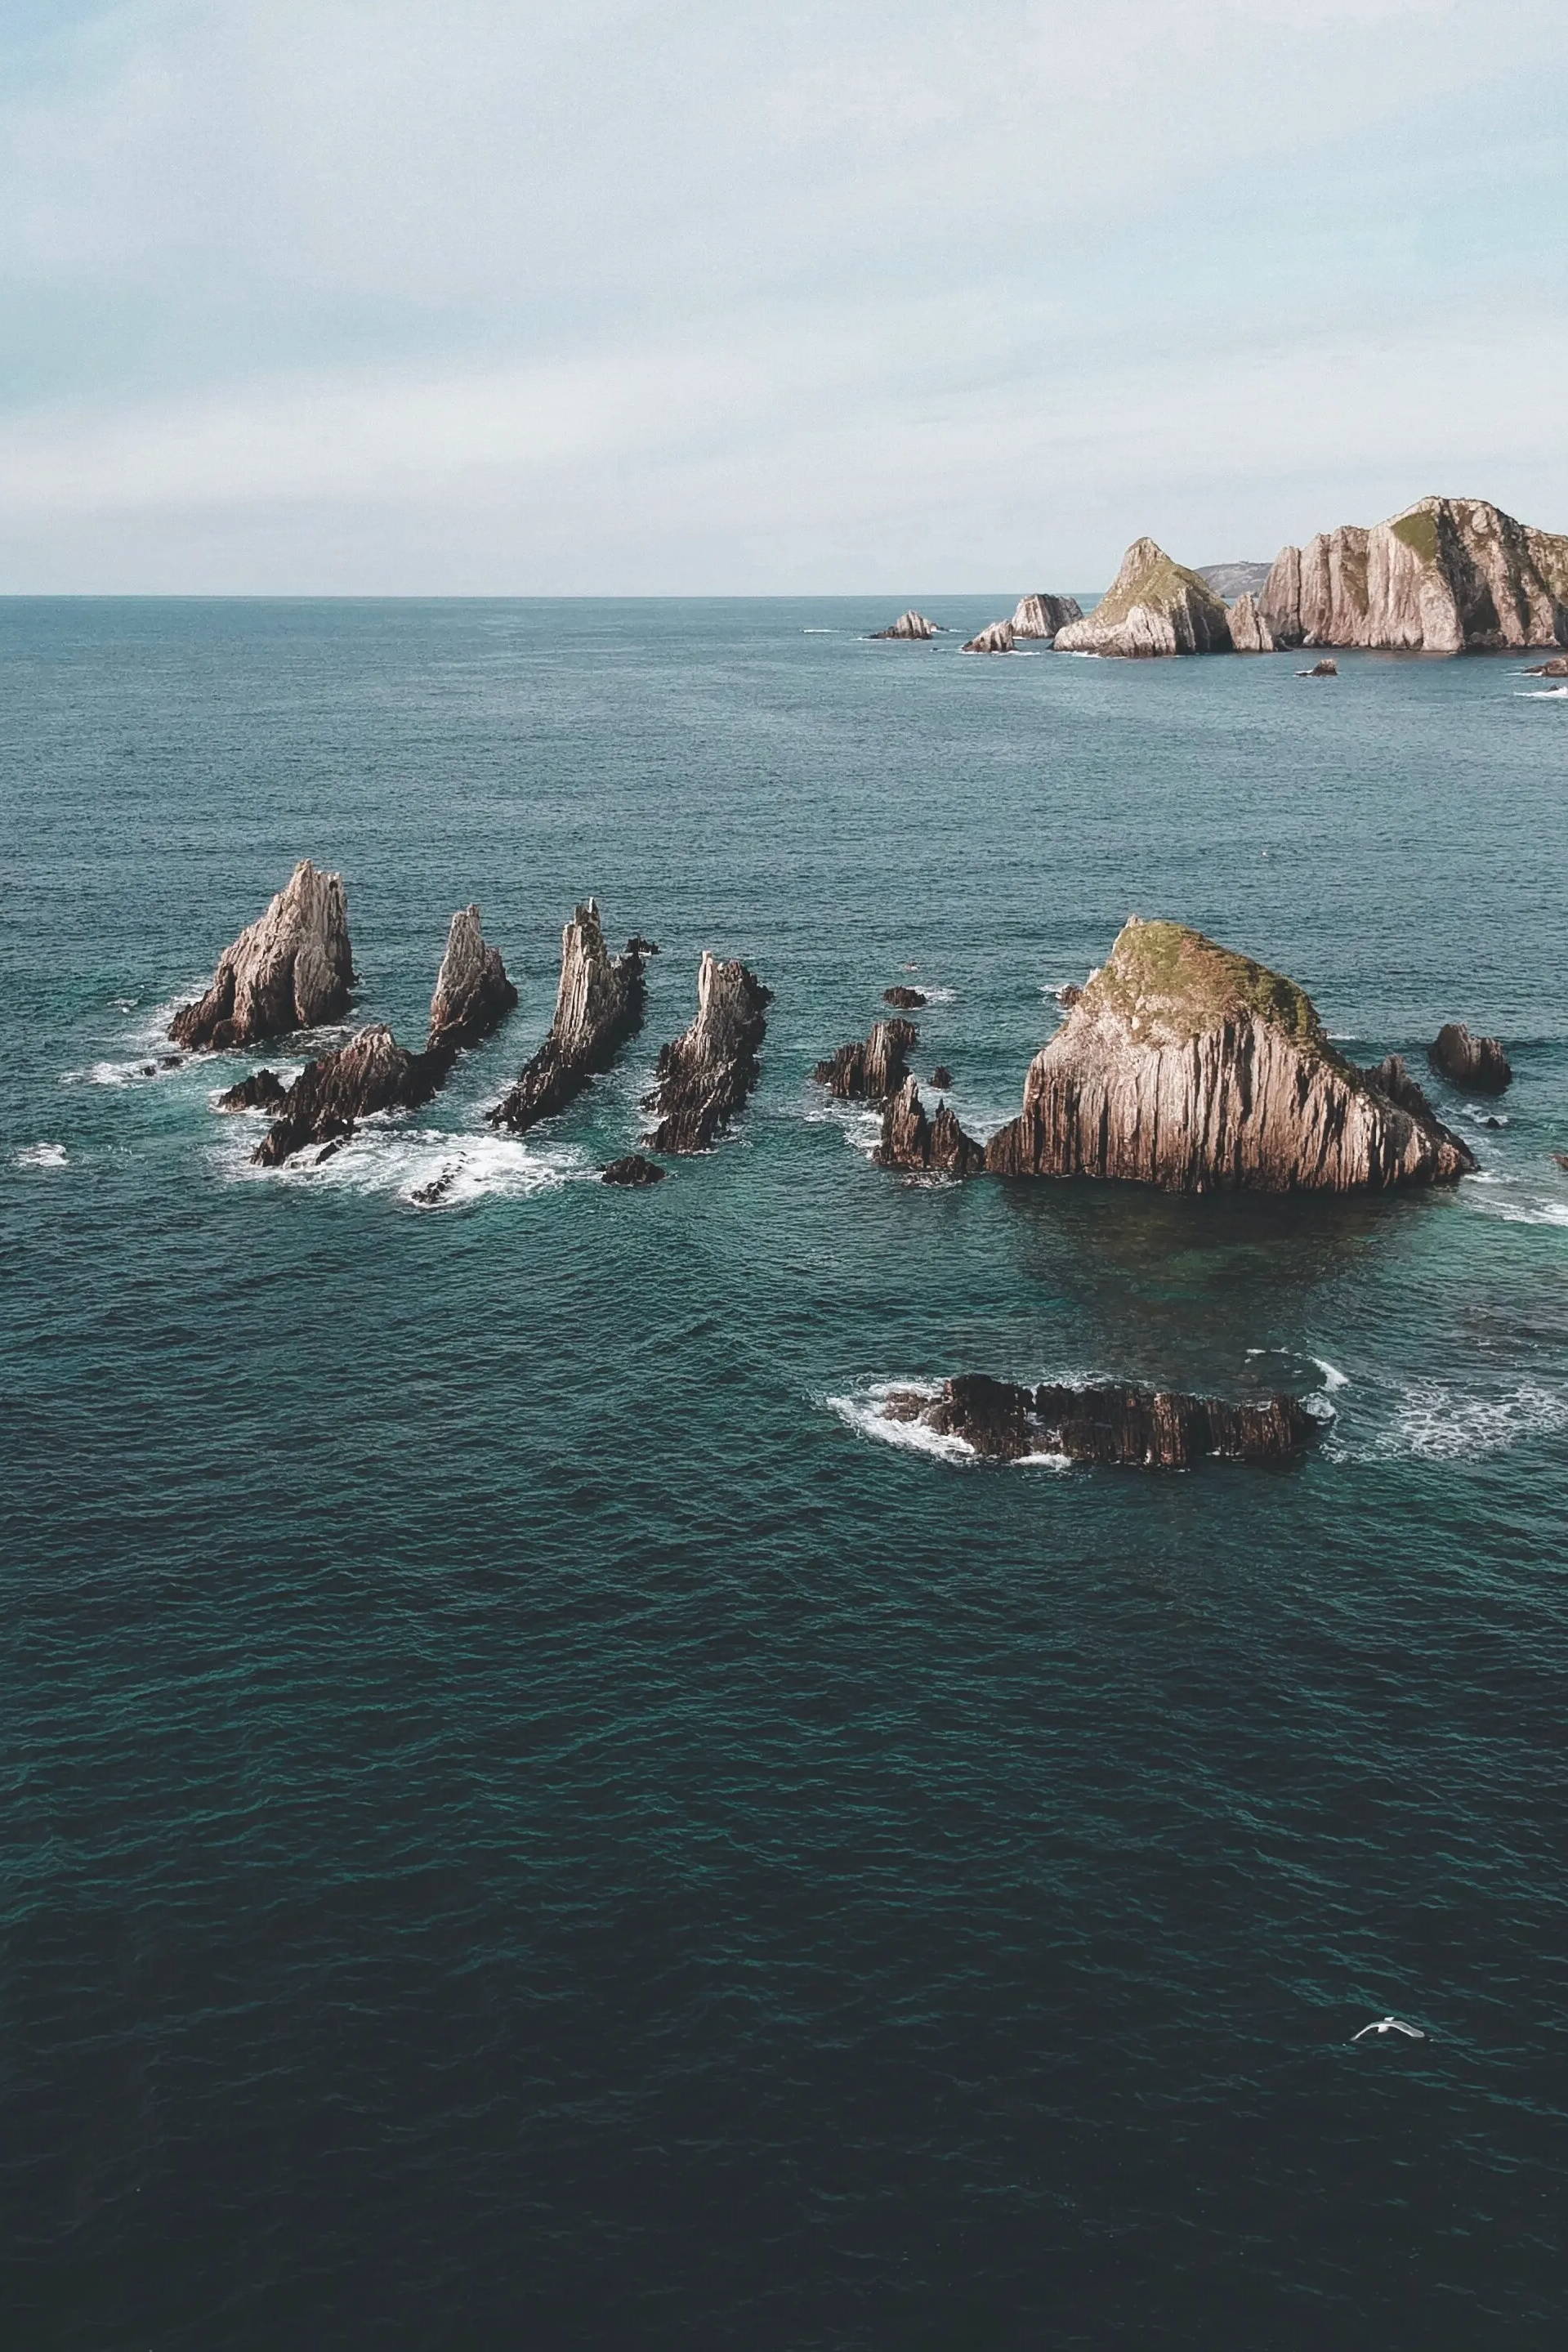 Rocks and cliffs in the ocean